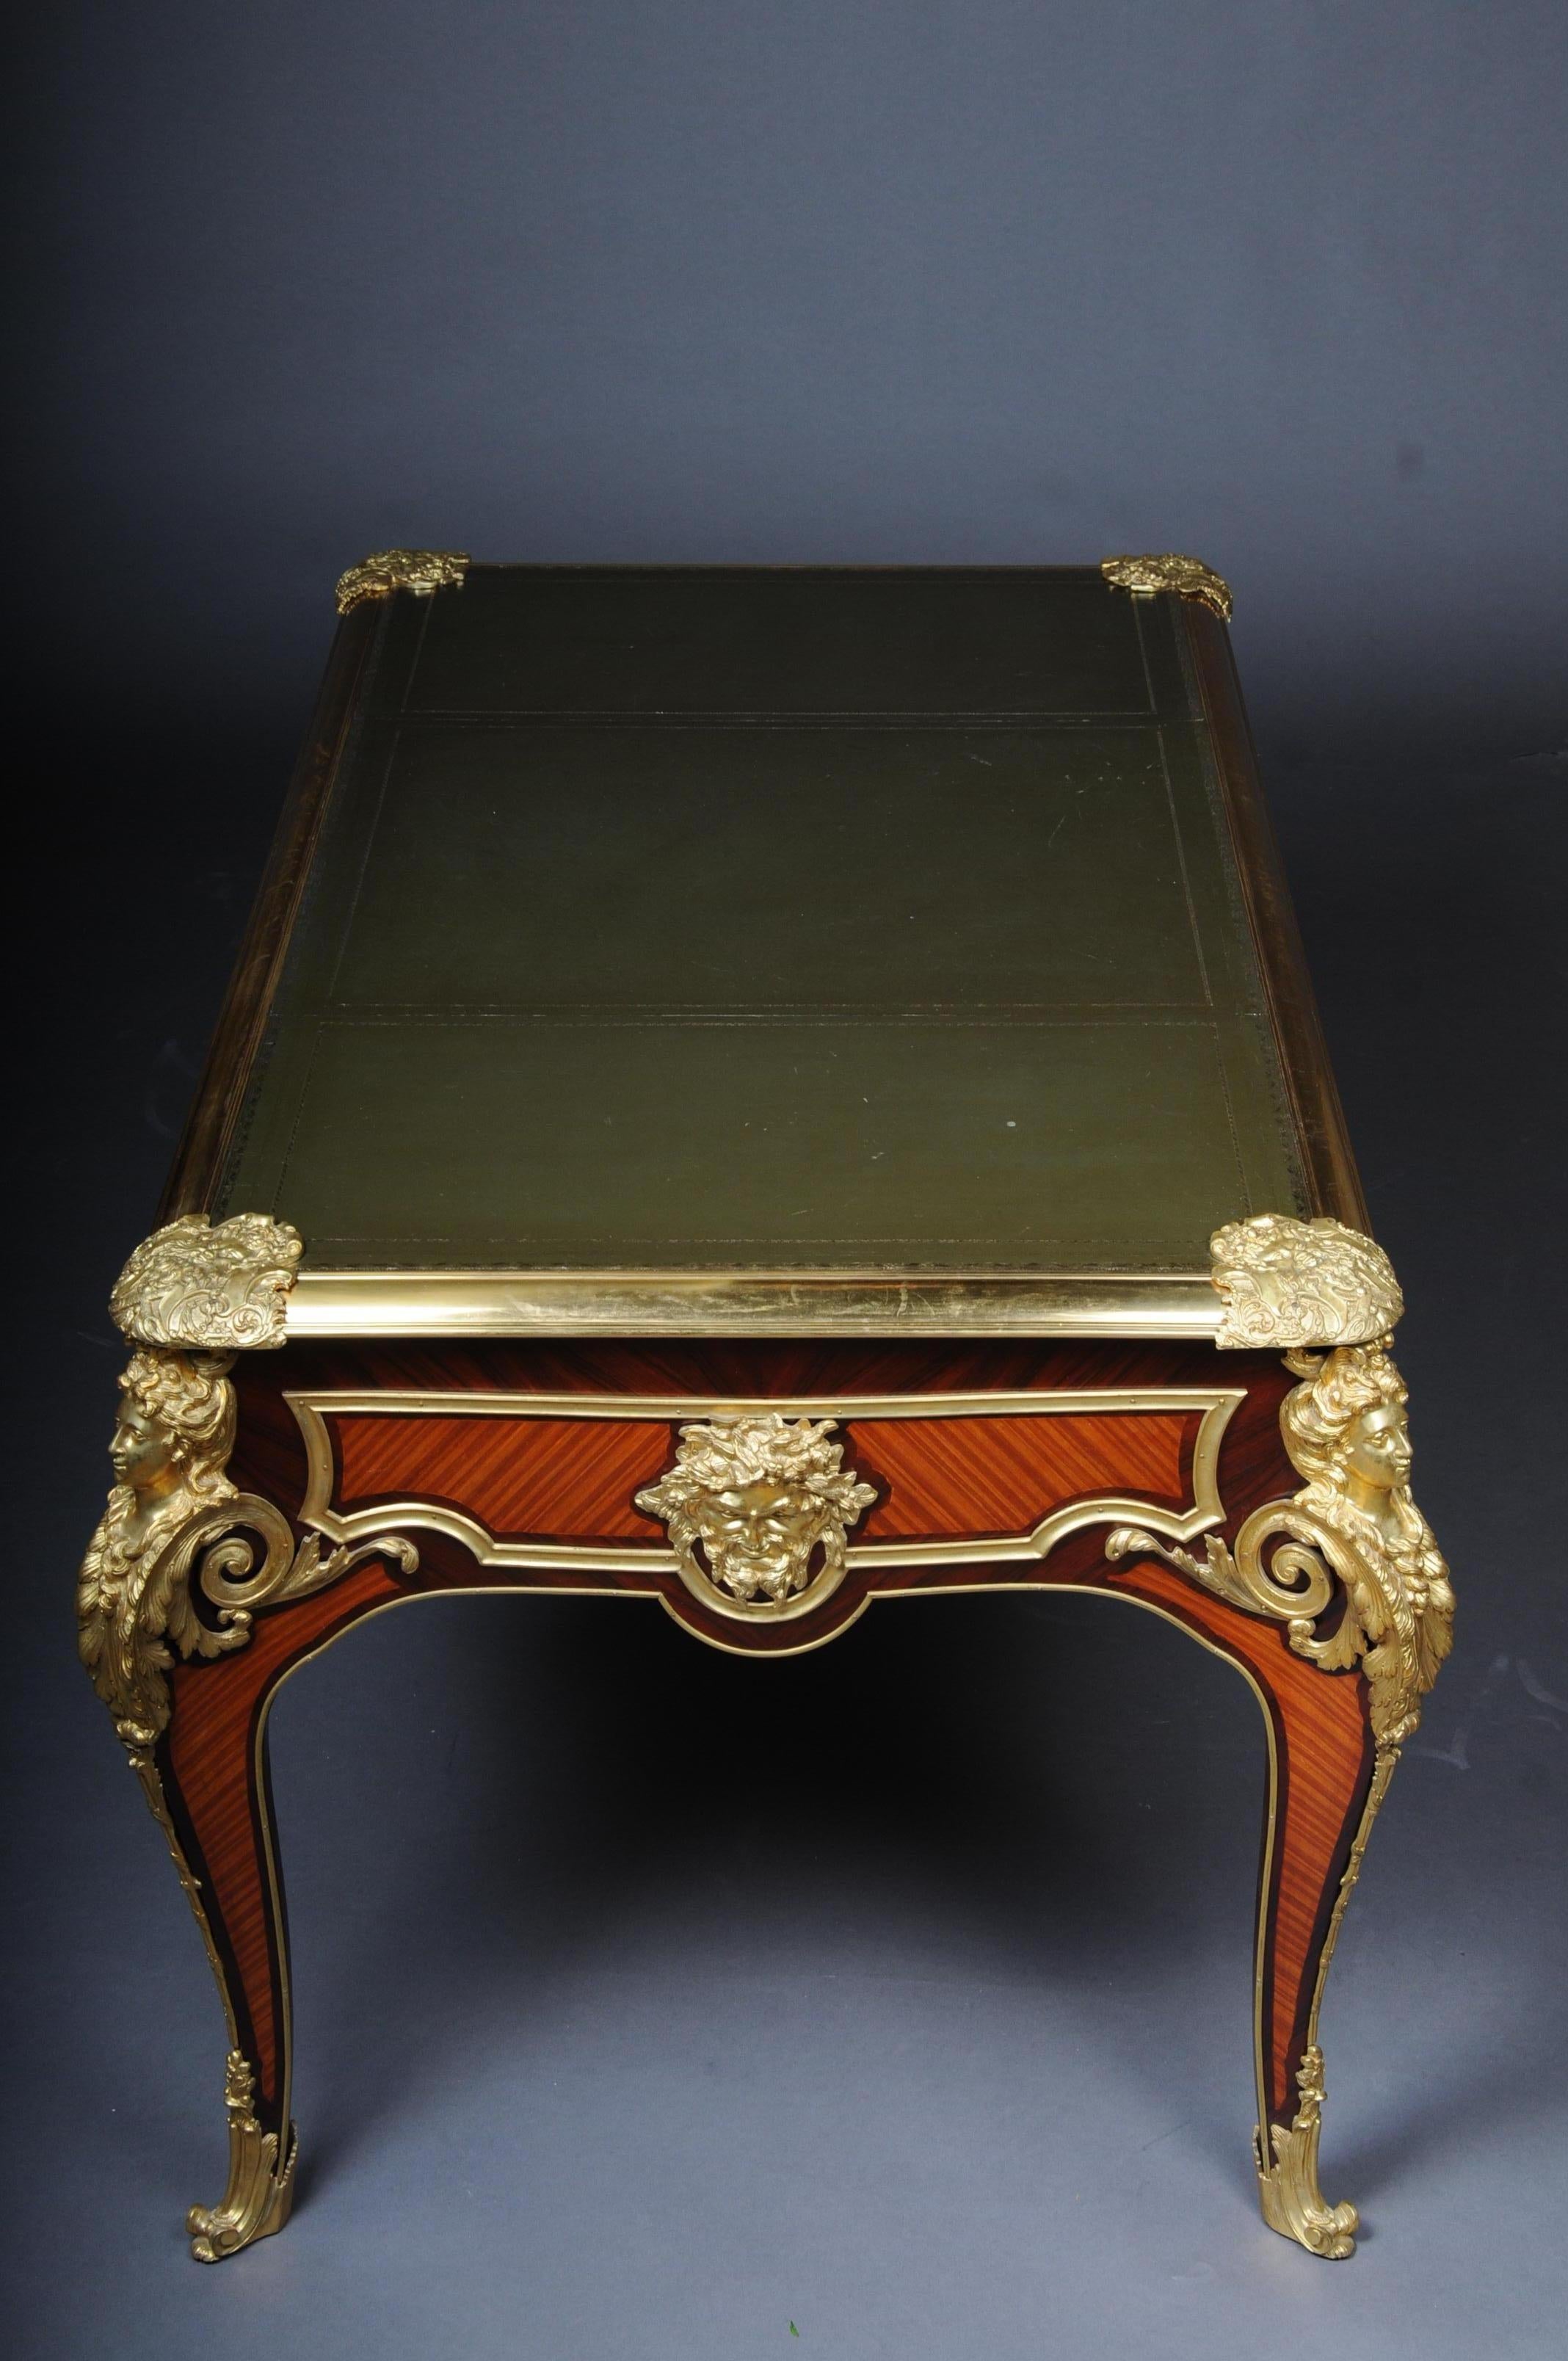 20th Century Imperial French Bureau Plat or Desk by Charles Boulle For Sale 4